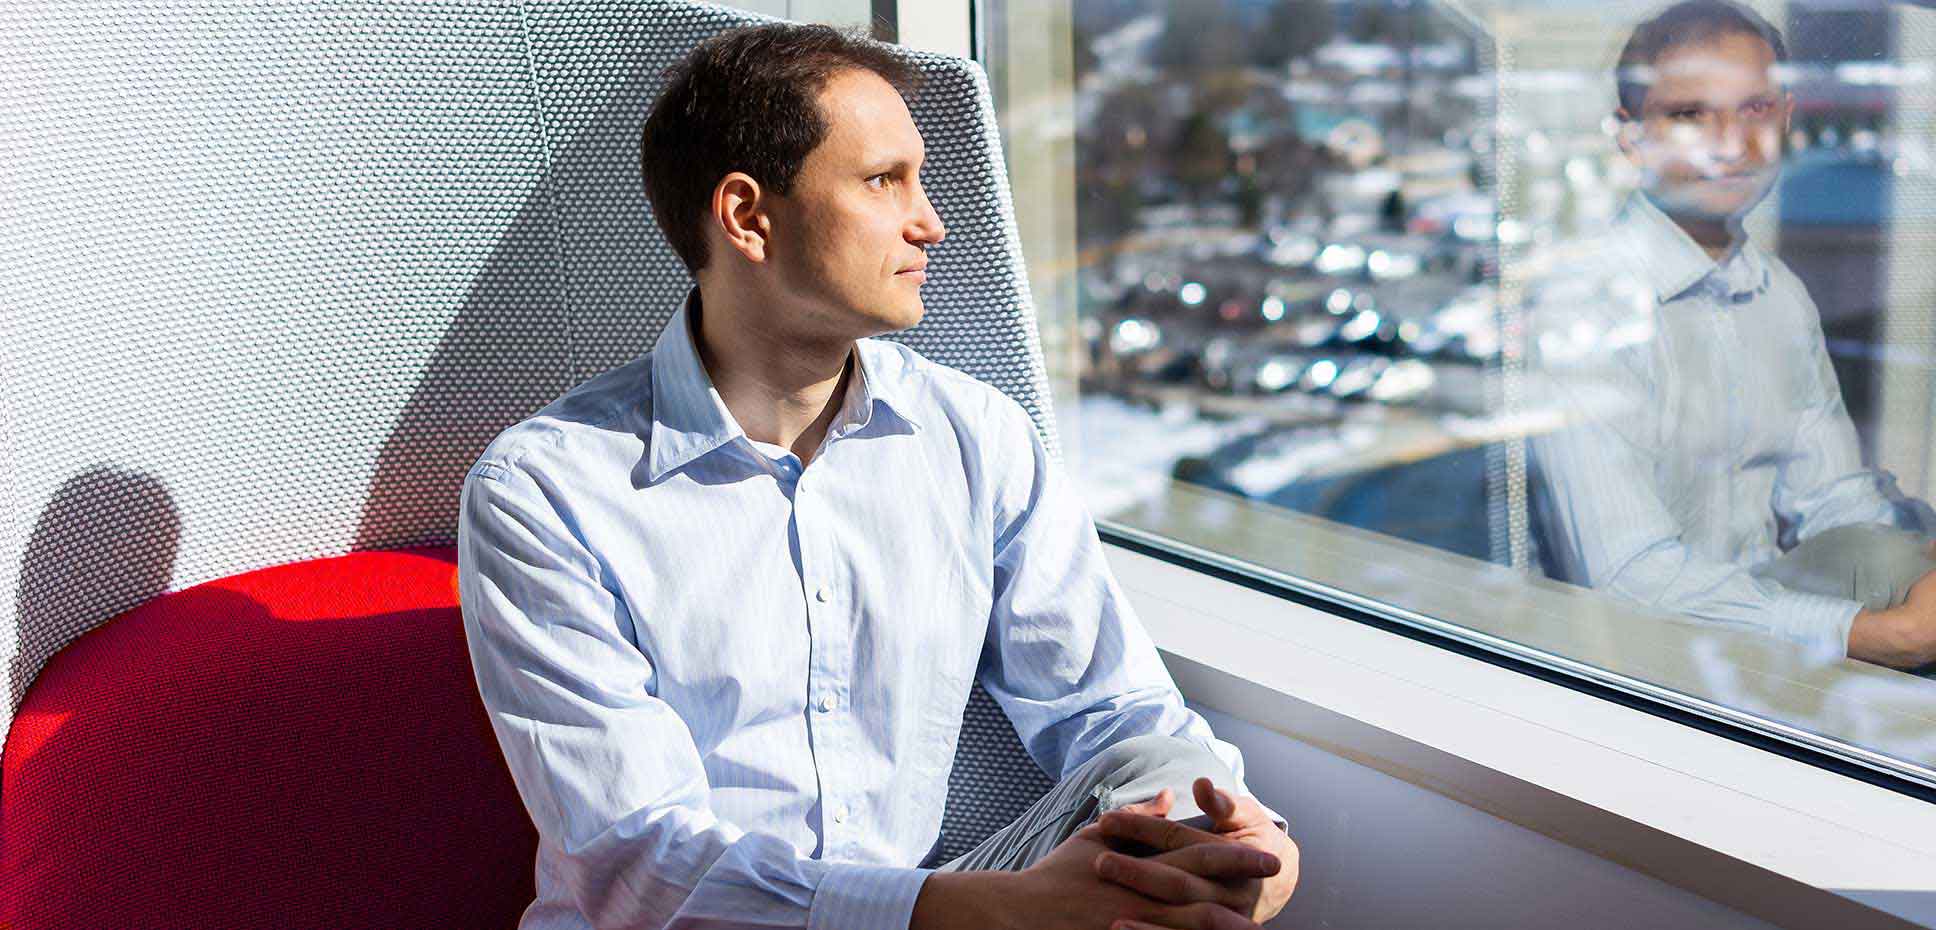 A man gazes contemplatively out of a window